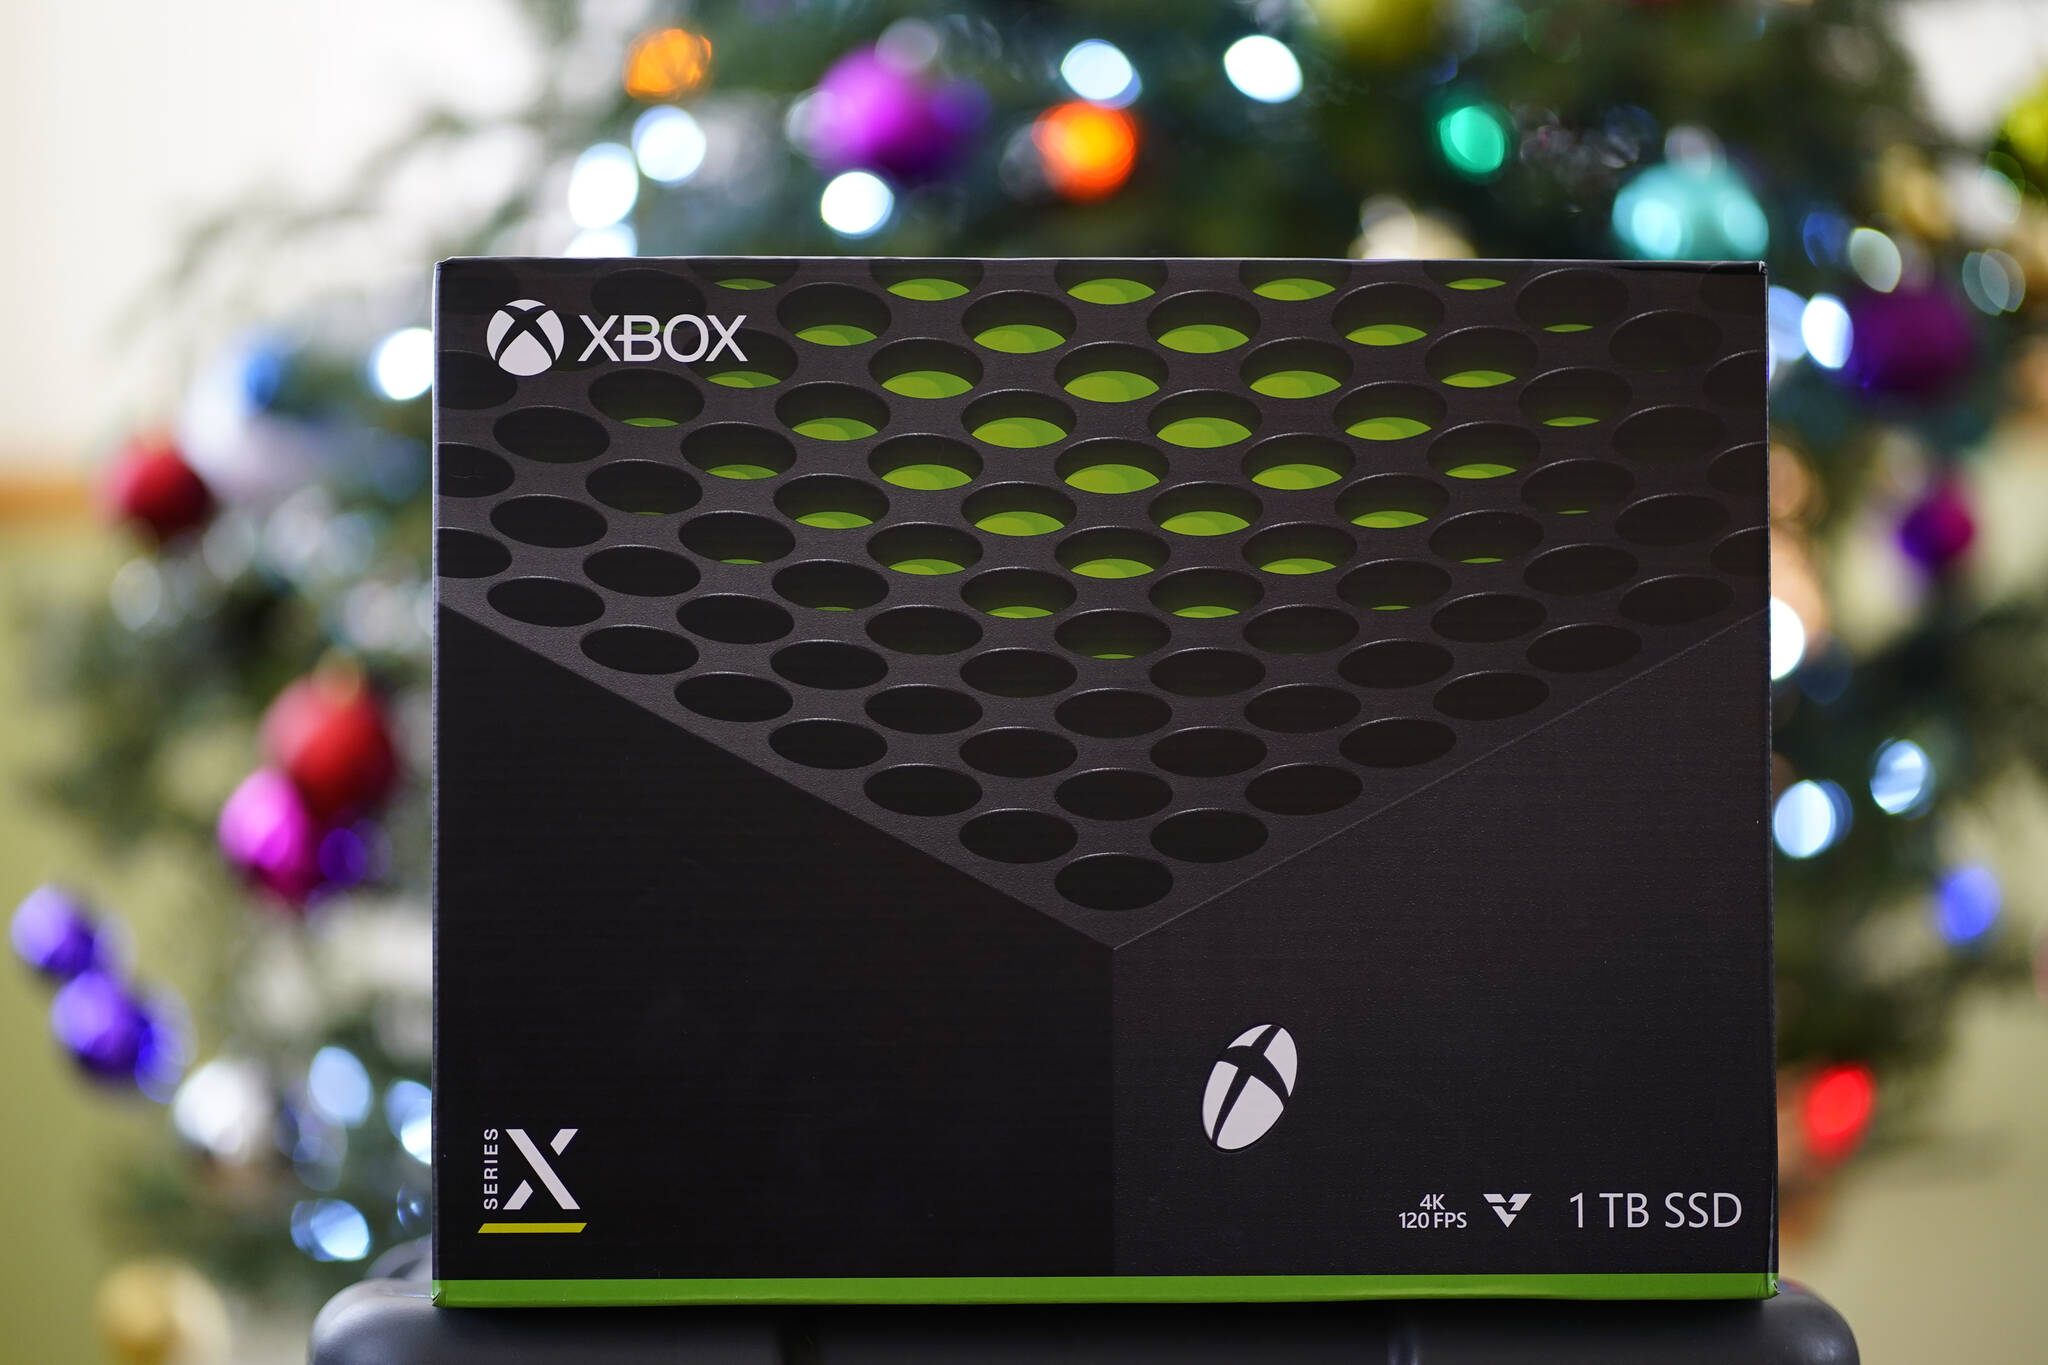 FILE - A Microsoft Xbox Series X video game console is seen, on Dec. 7, 2021, in Marple Township, Pa. One small step for an intrepid crew of 24th century space explorers could be a giant leap — or flop — for Microsoft when the Xbox-maker launches its long-awaited video game Starfield. (AP Photo/Matt Slocum, File)